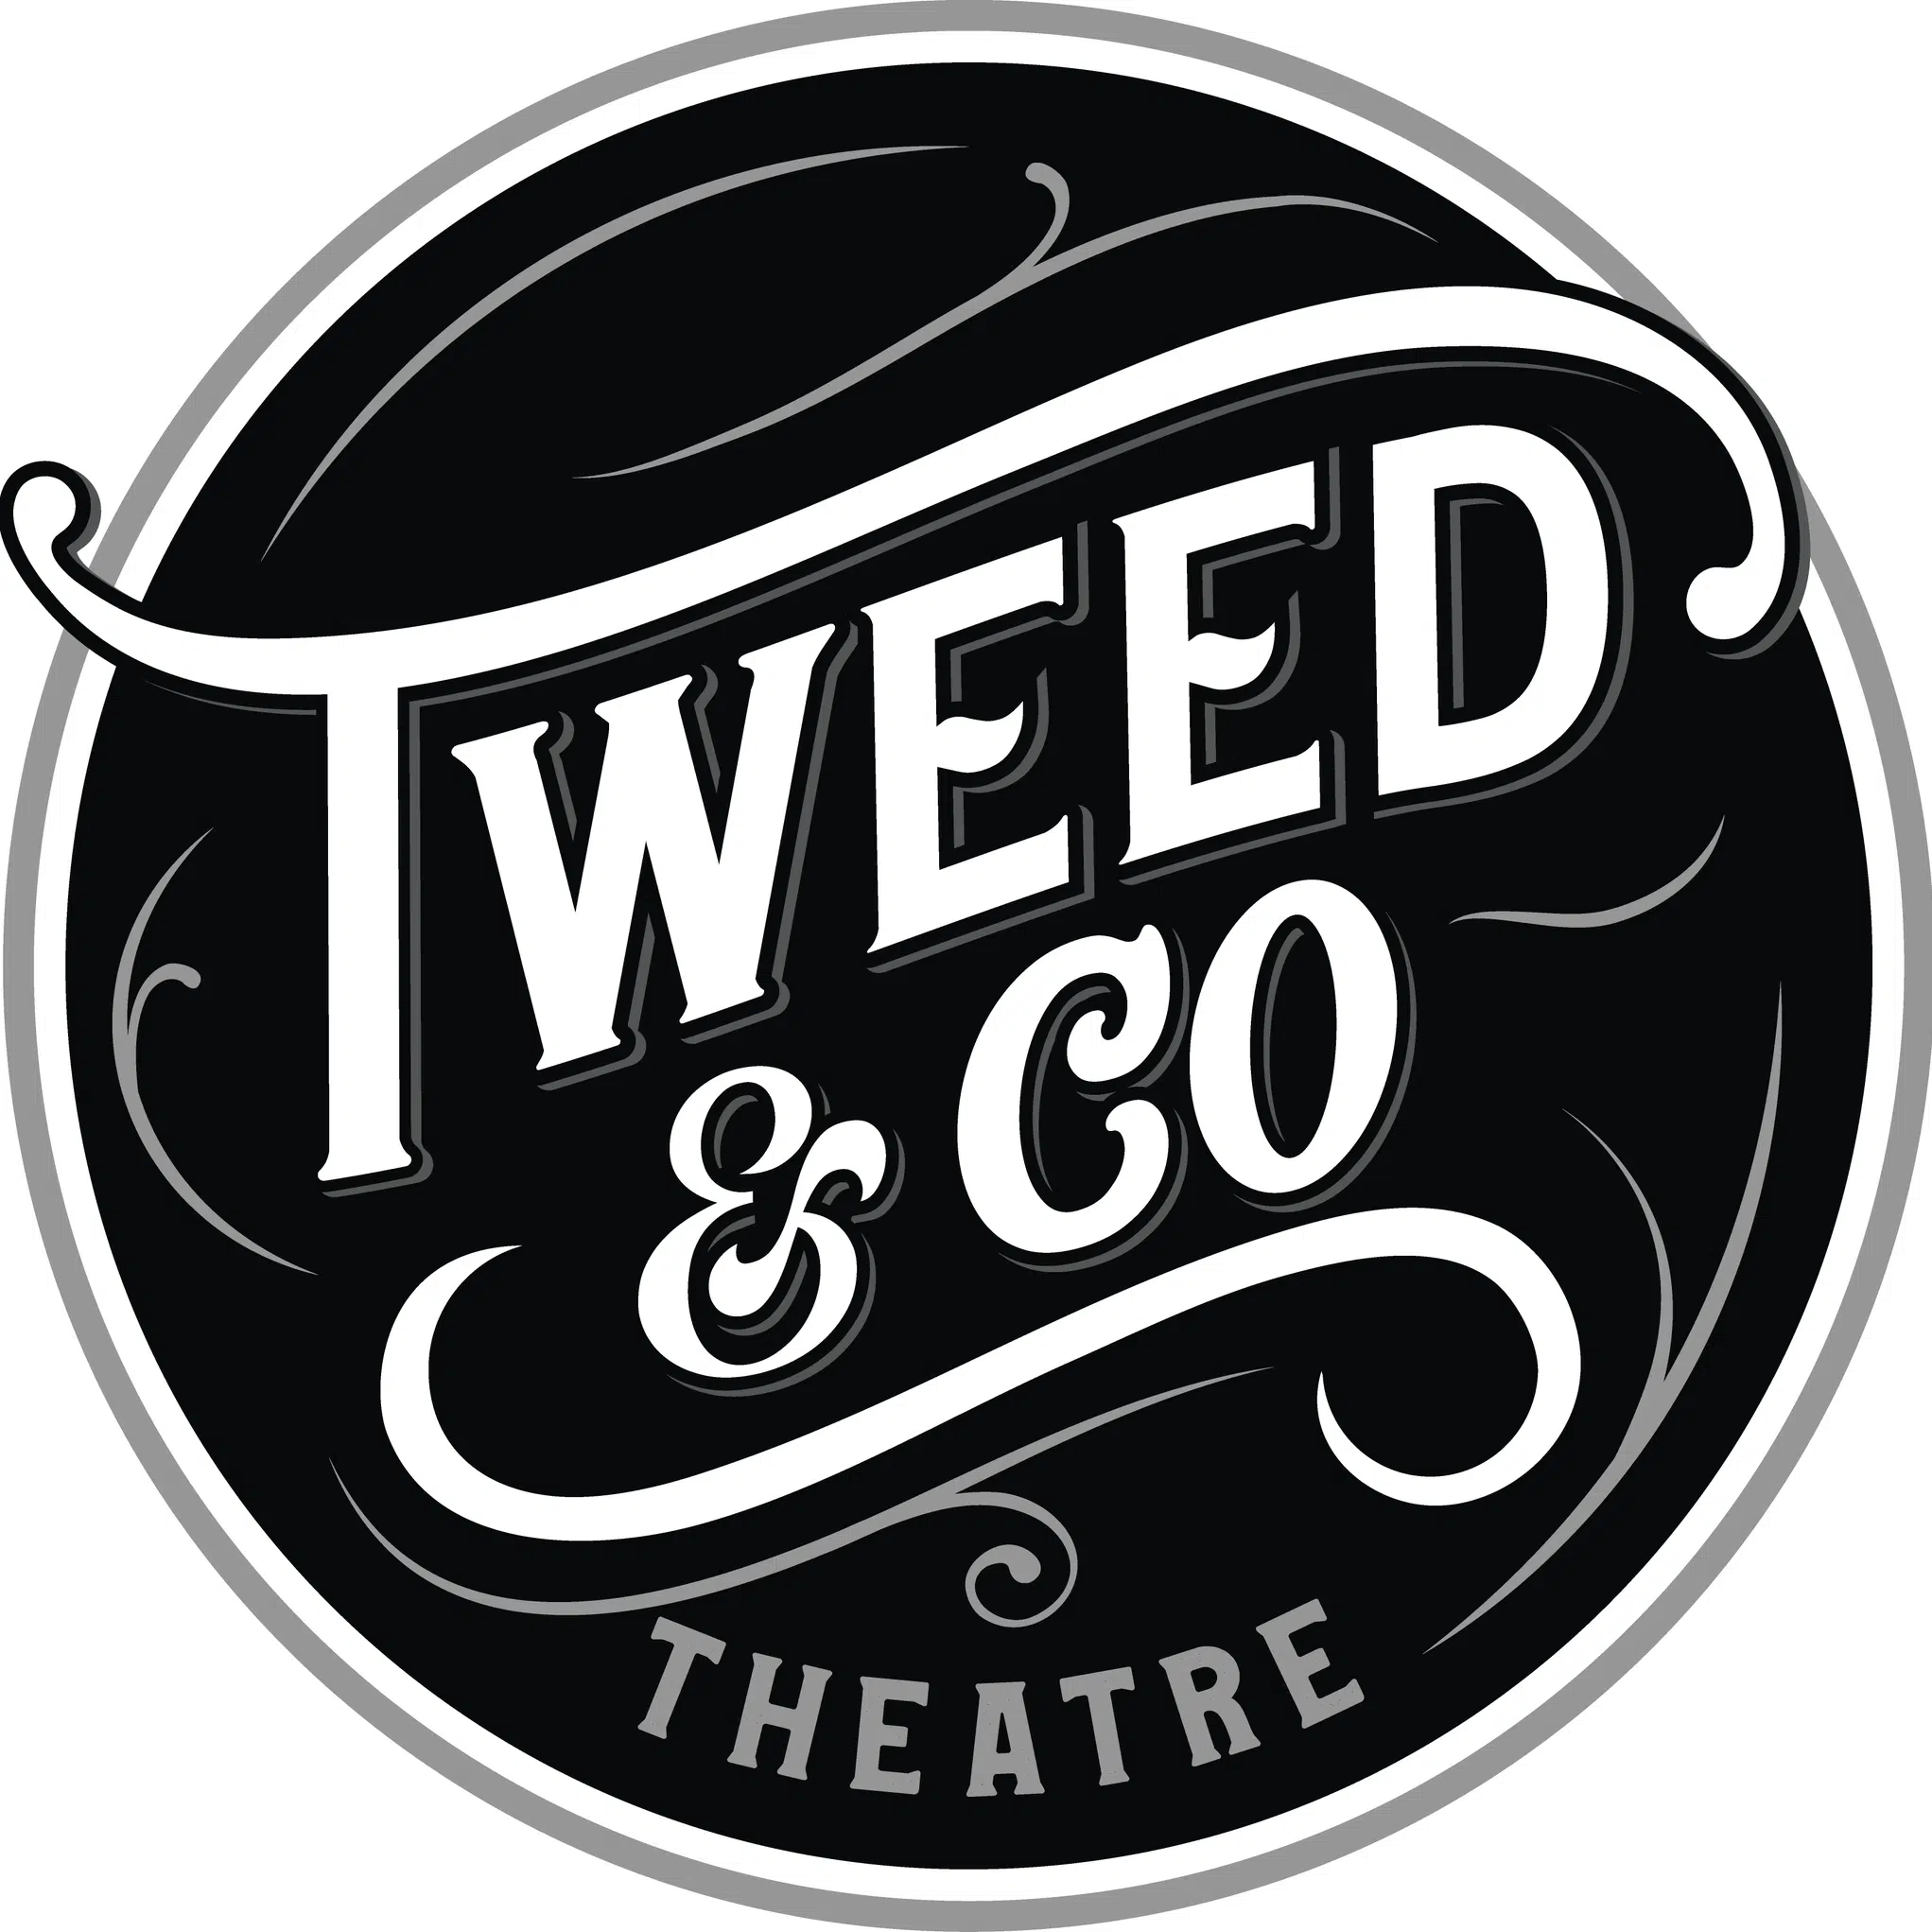 Tweed & Company Theatre getting ready to present first two shows of the season